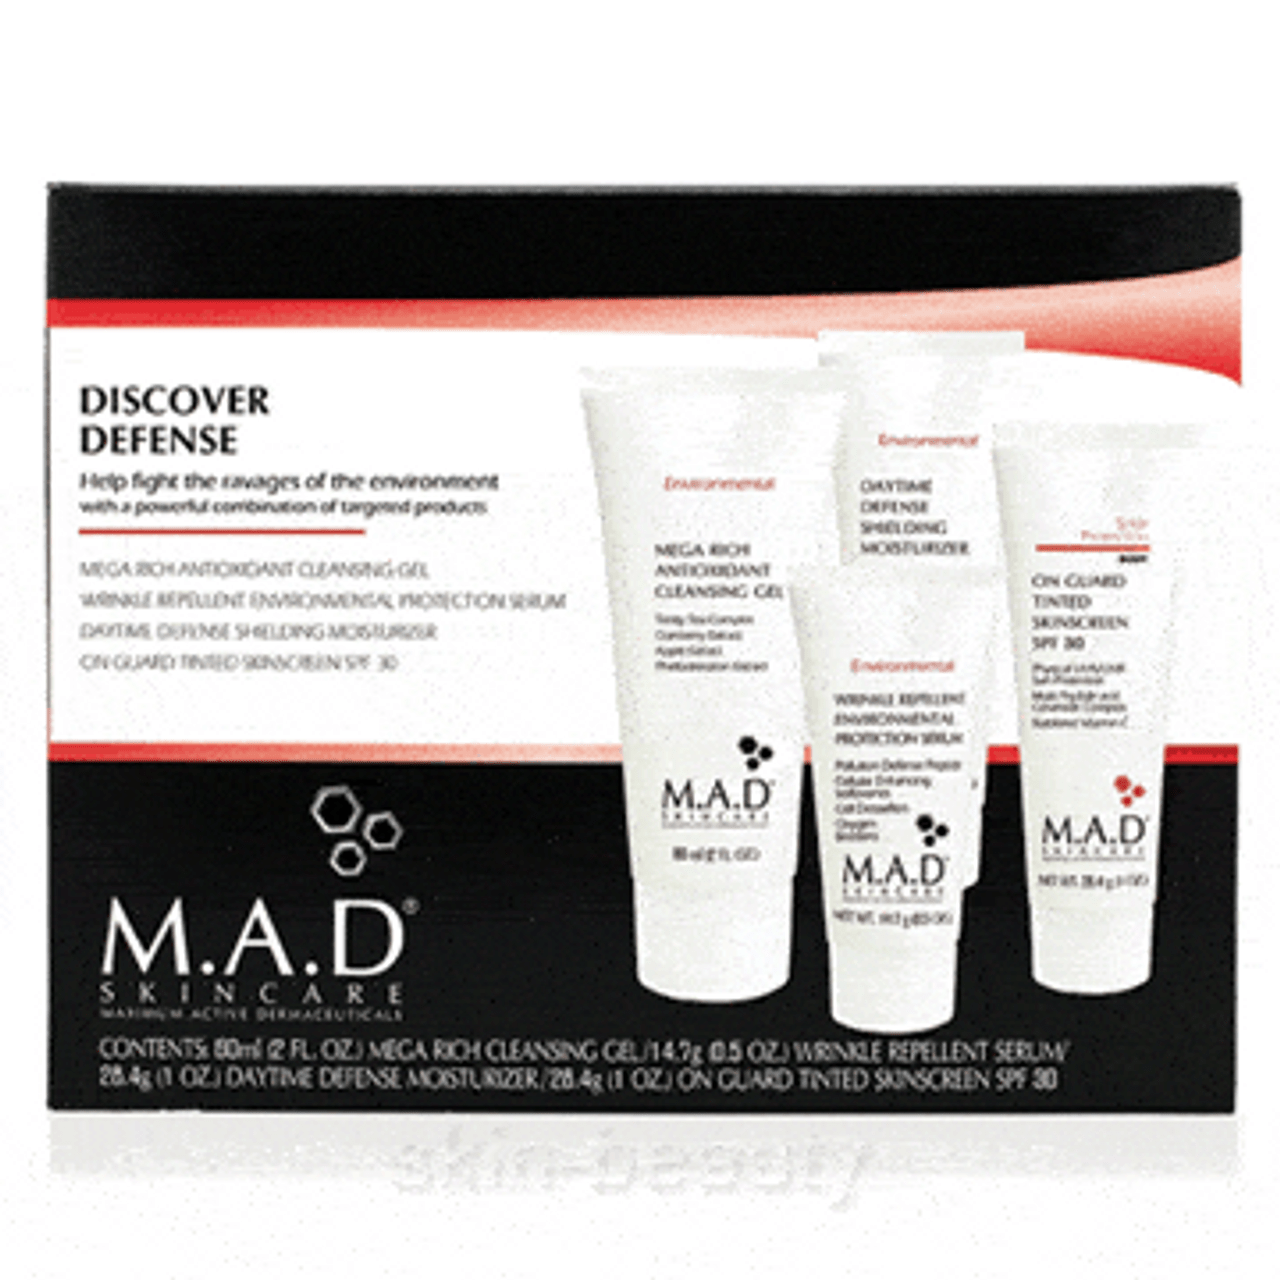 m.a.d skincare, Discover Radiant Skin with Cutting-Edge Skincare